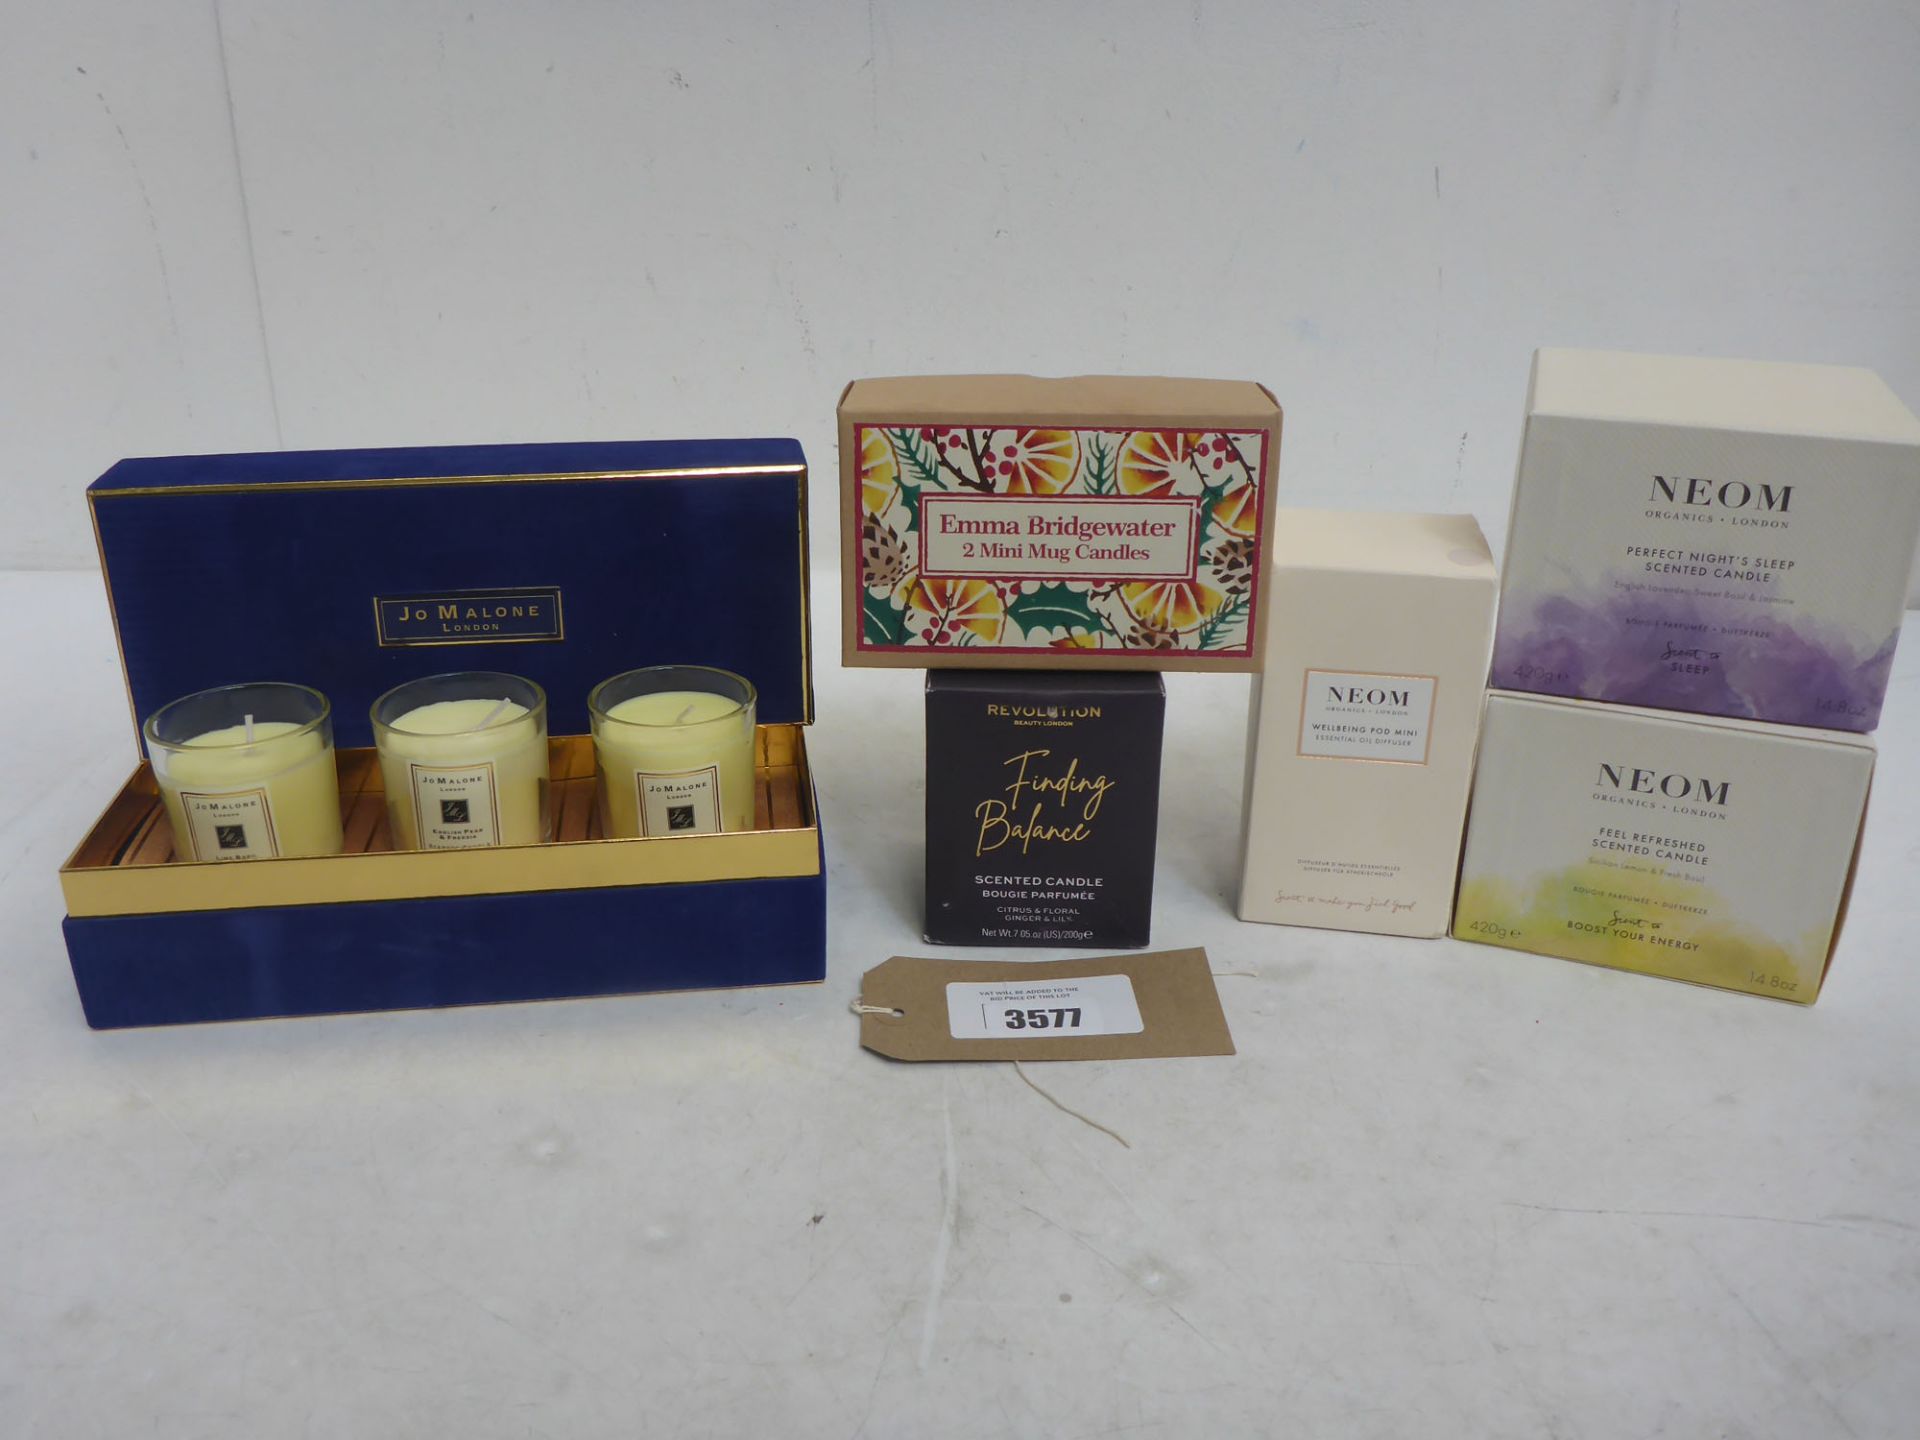 Neom oil diffuser and Neom, Jo Malone, Revolution & Emma Bridgewater scented candles